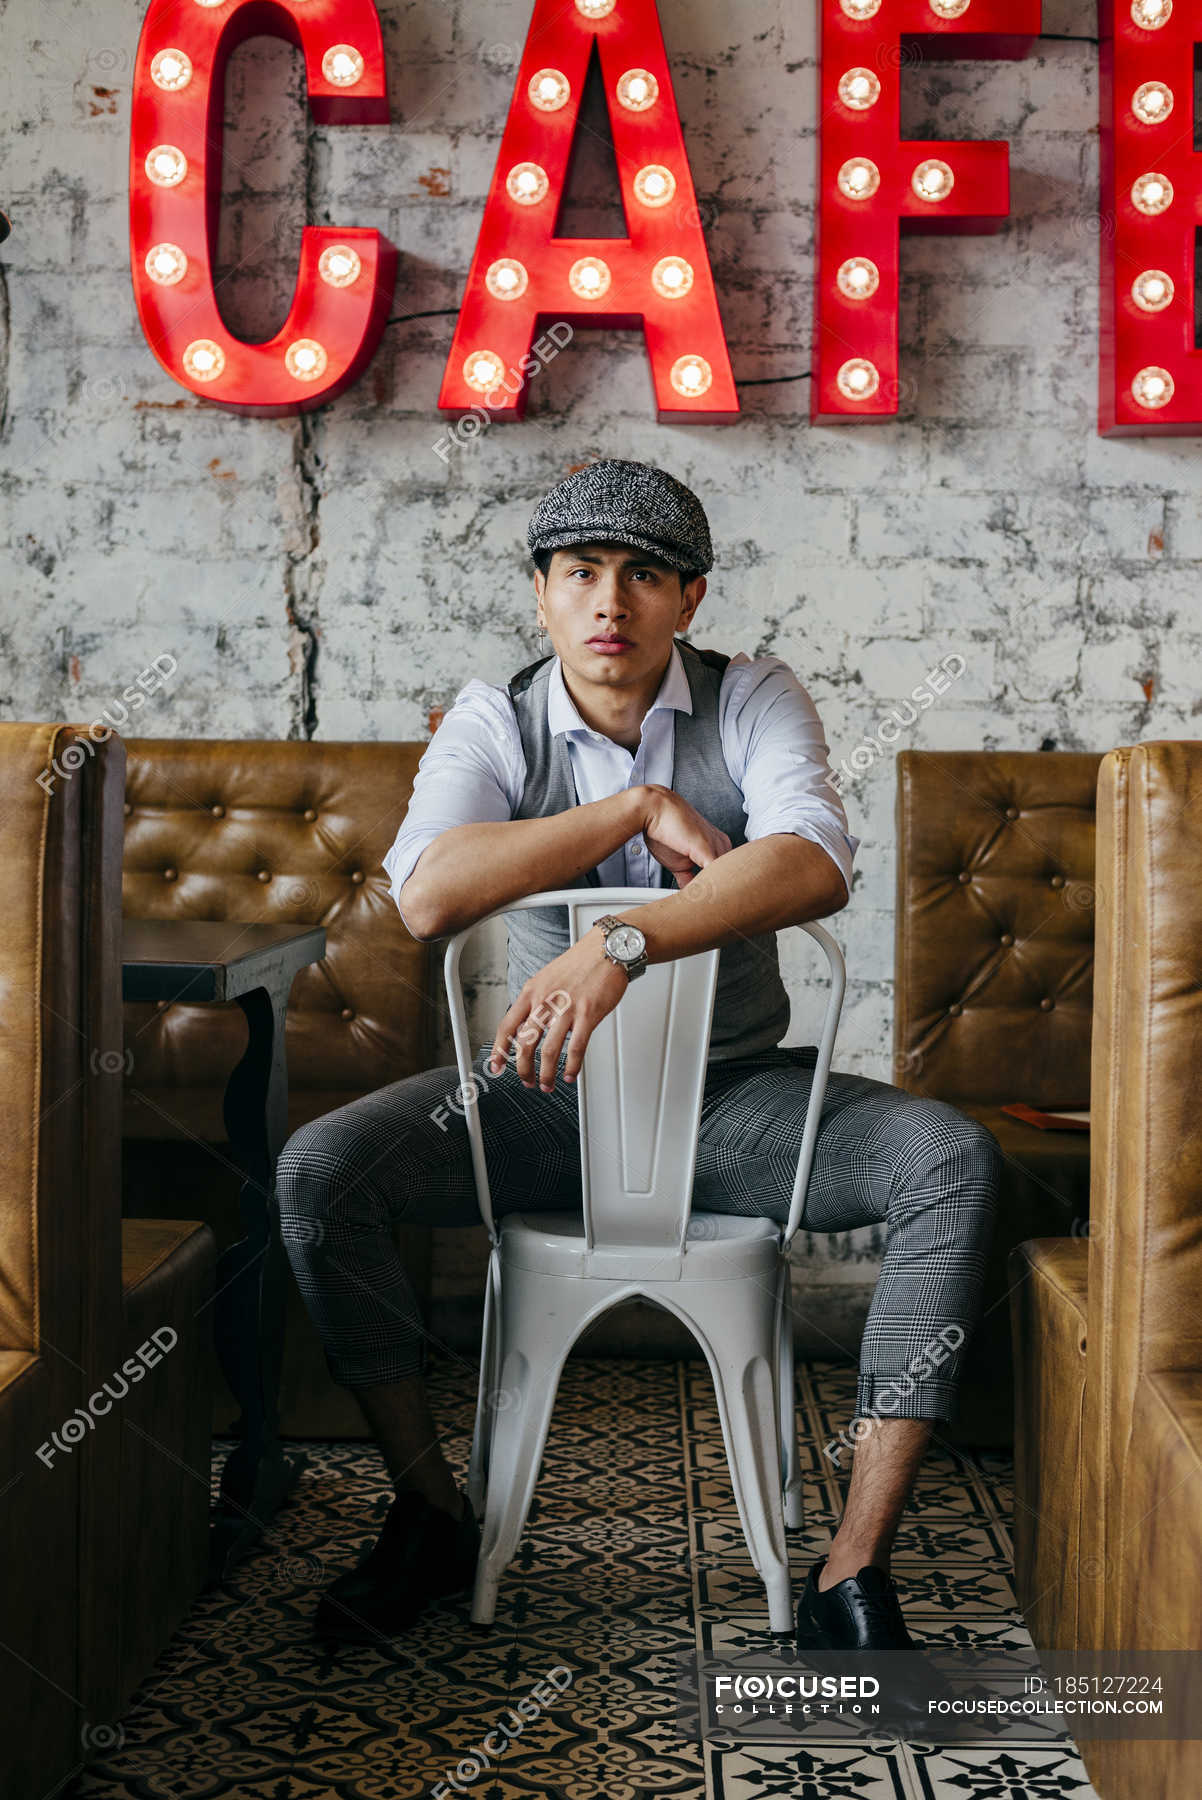 Man in vintage clothes posing on chair in cafe — style, youth - Stock Photo  | #185127224